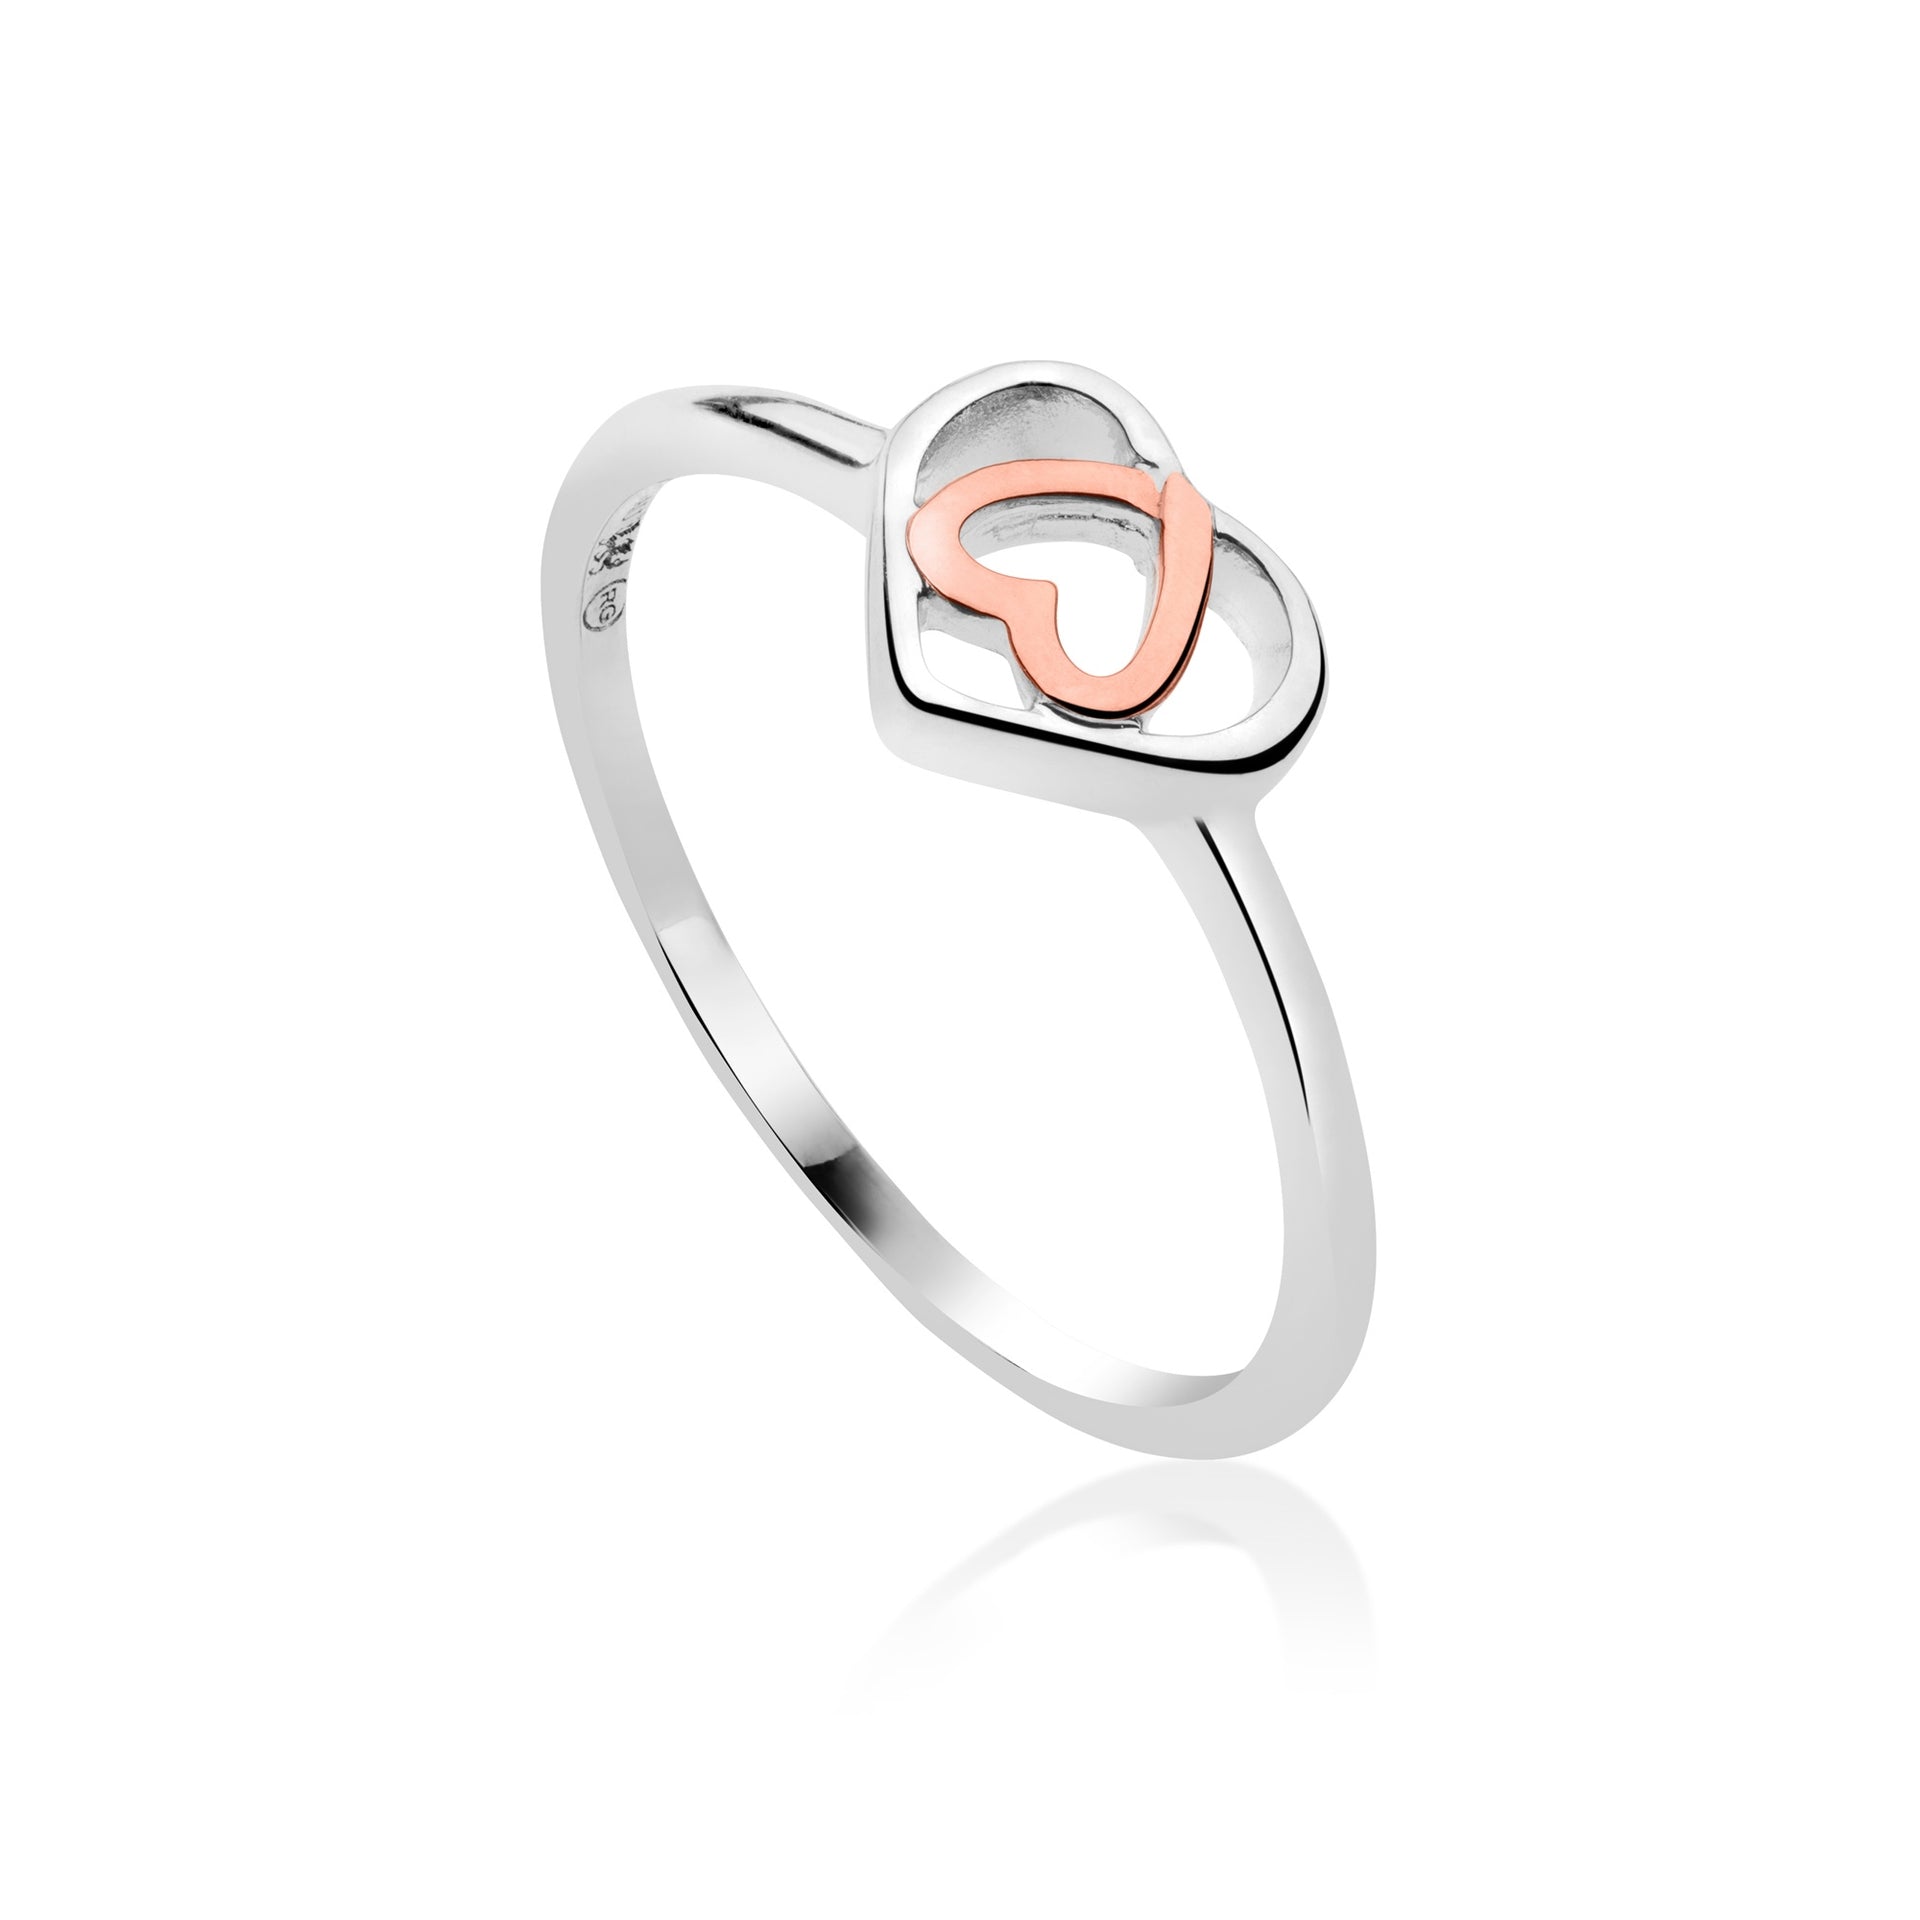 Affinity Heart Silver Ring